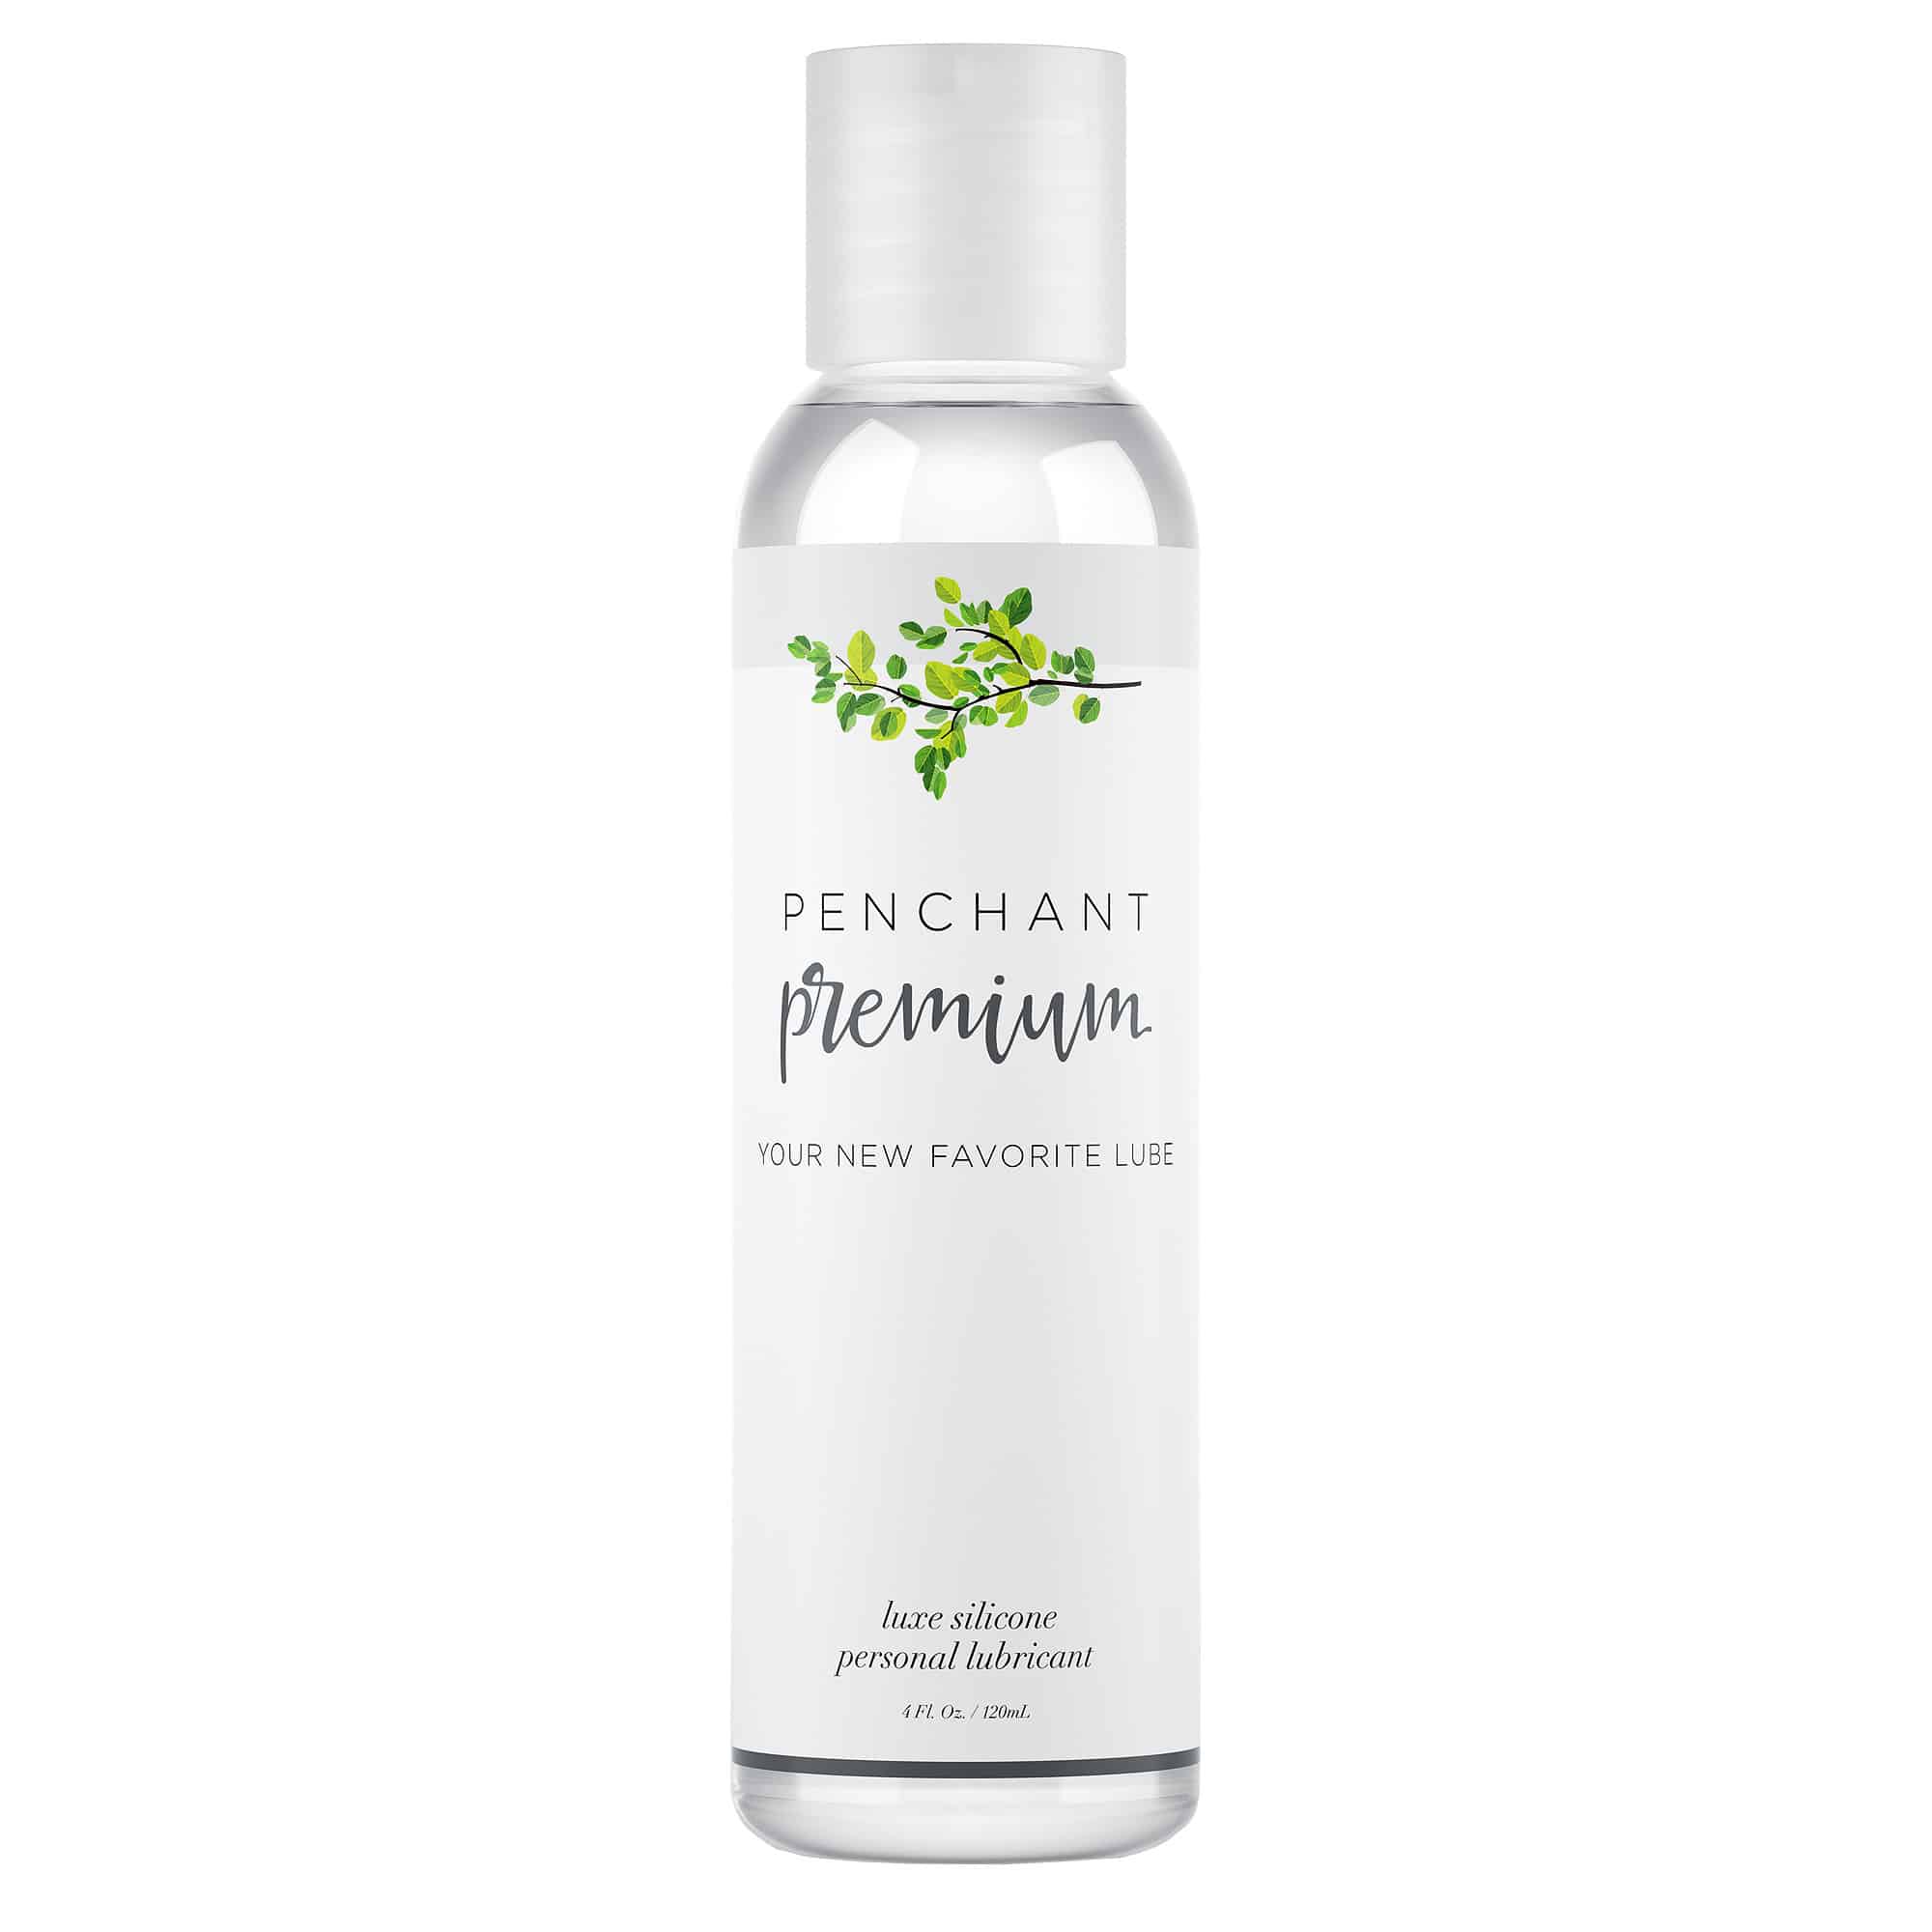 Intimate Personal Lubricant for Sensitive Skin by Penchant Premium ...